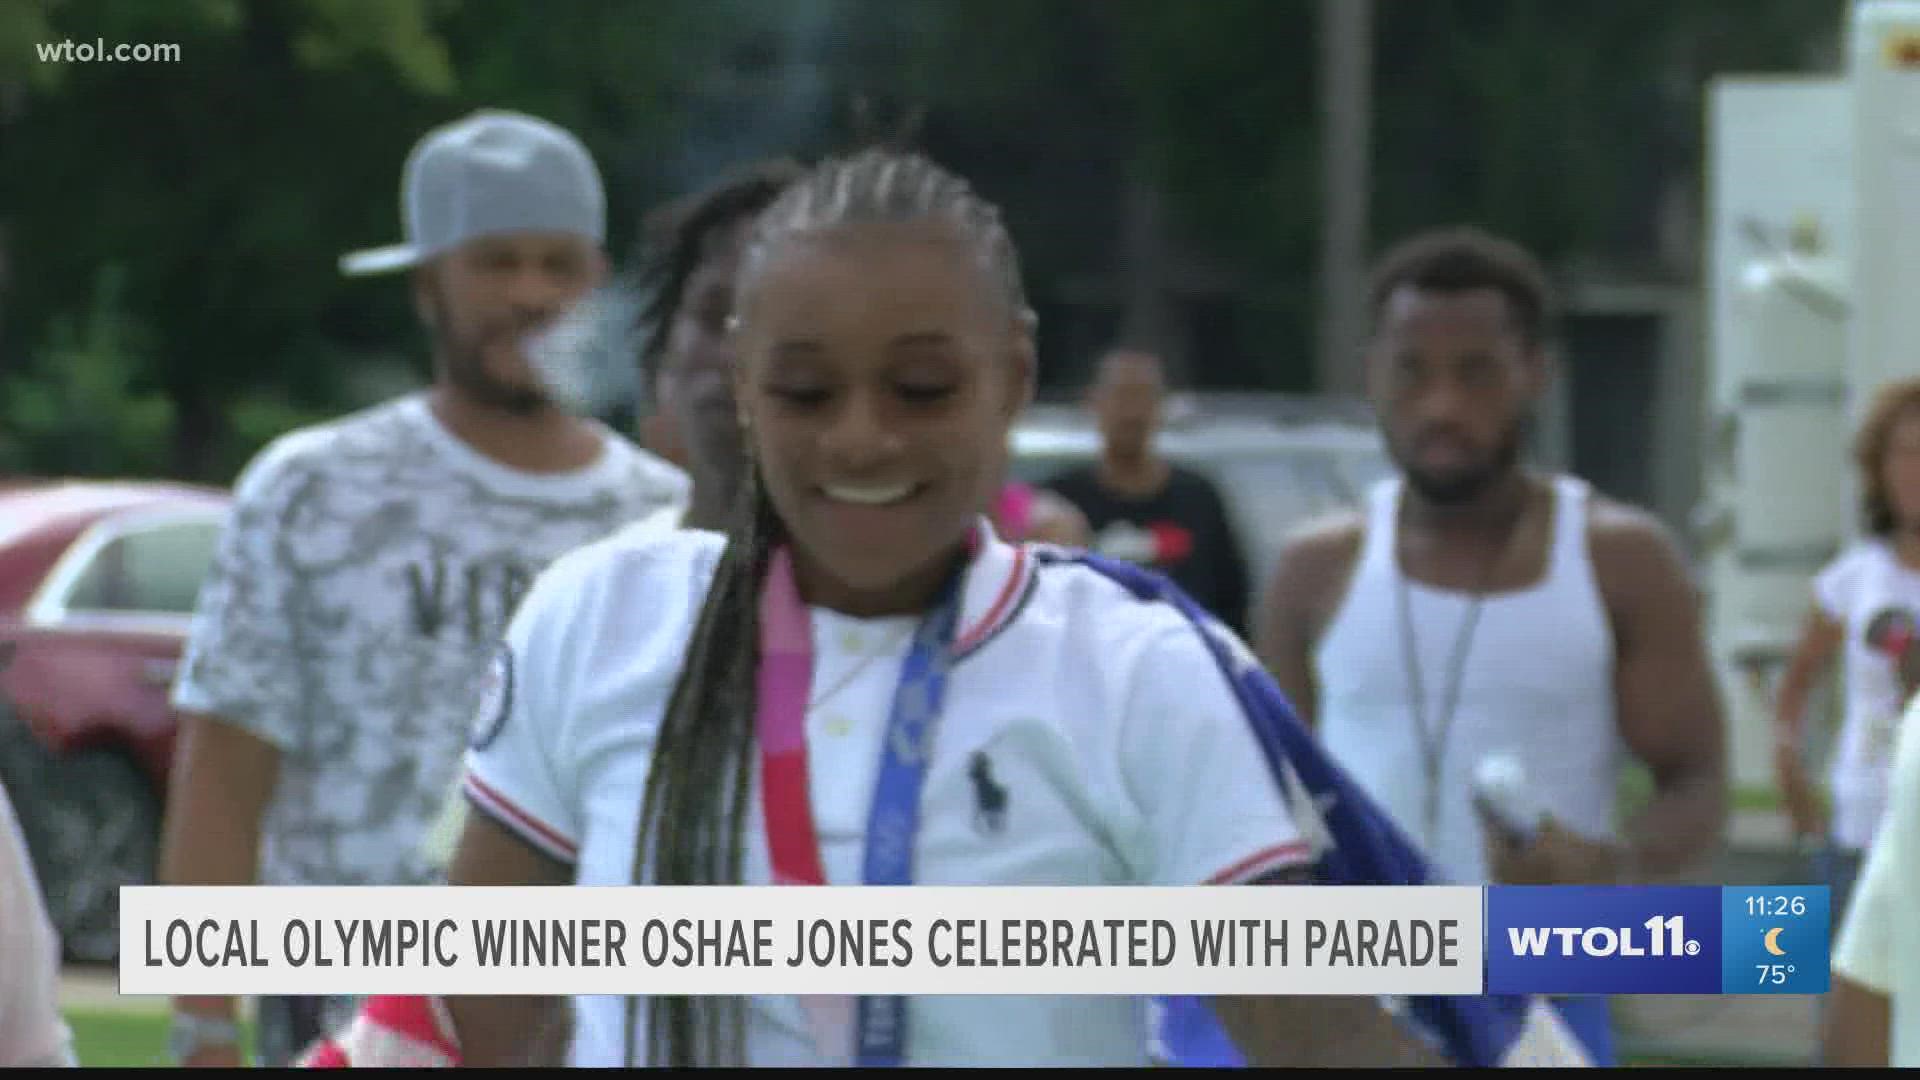 The parade ran down Indiana Avenue in the Junction area where Jones grew up. It ended with a celebration at Savage Park.